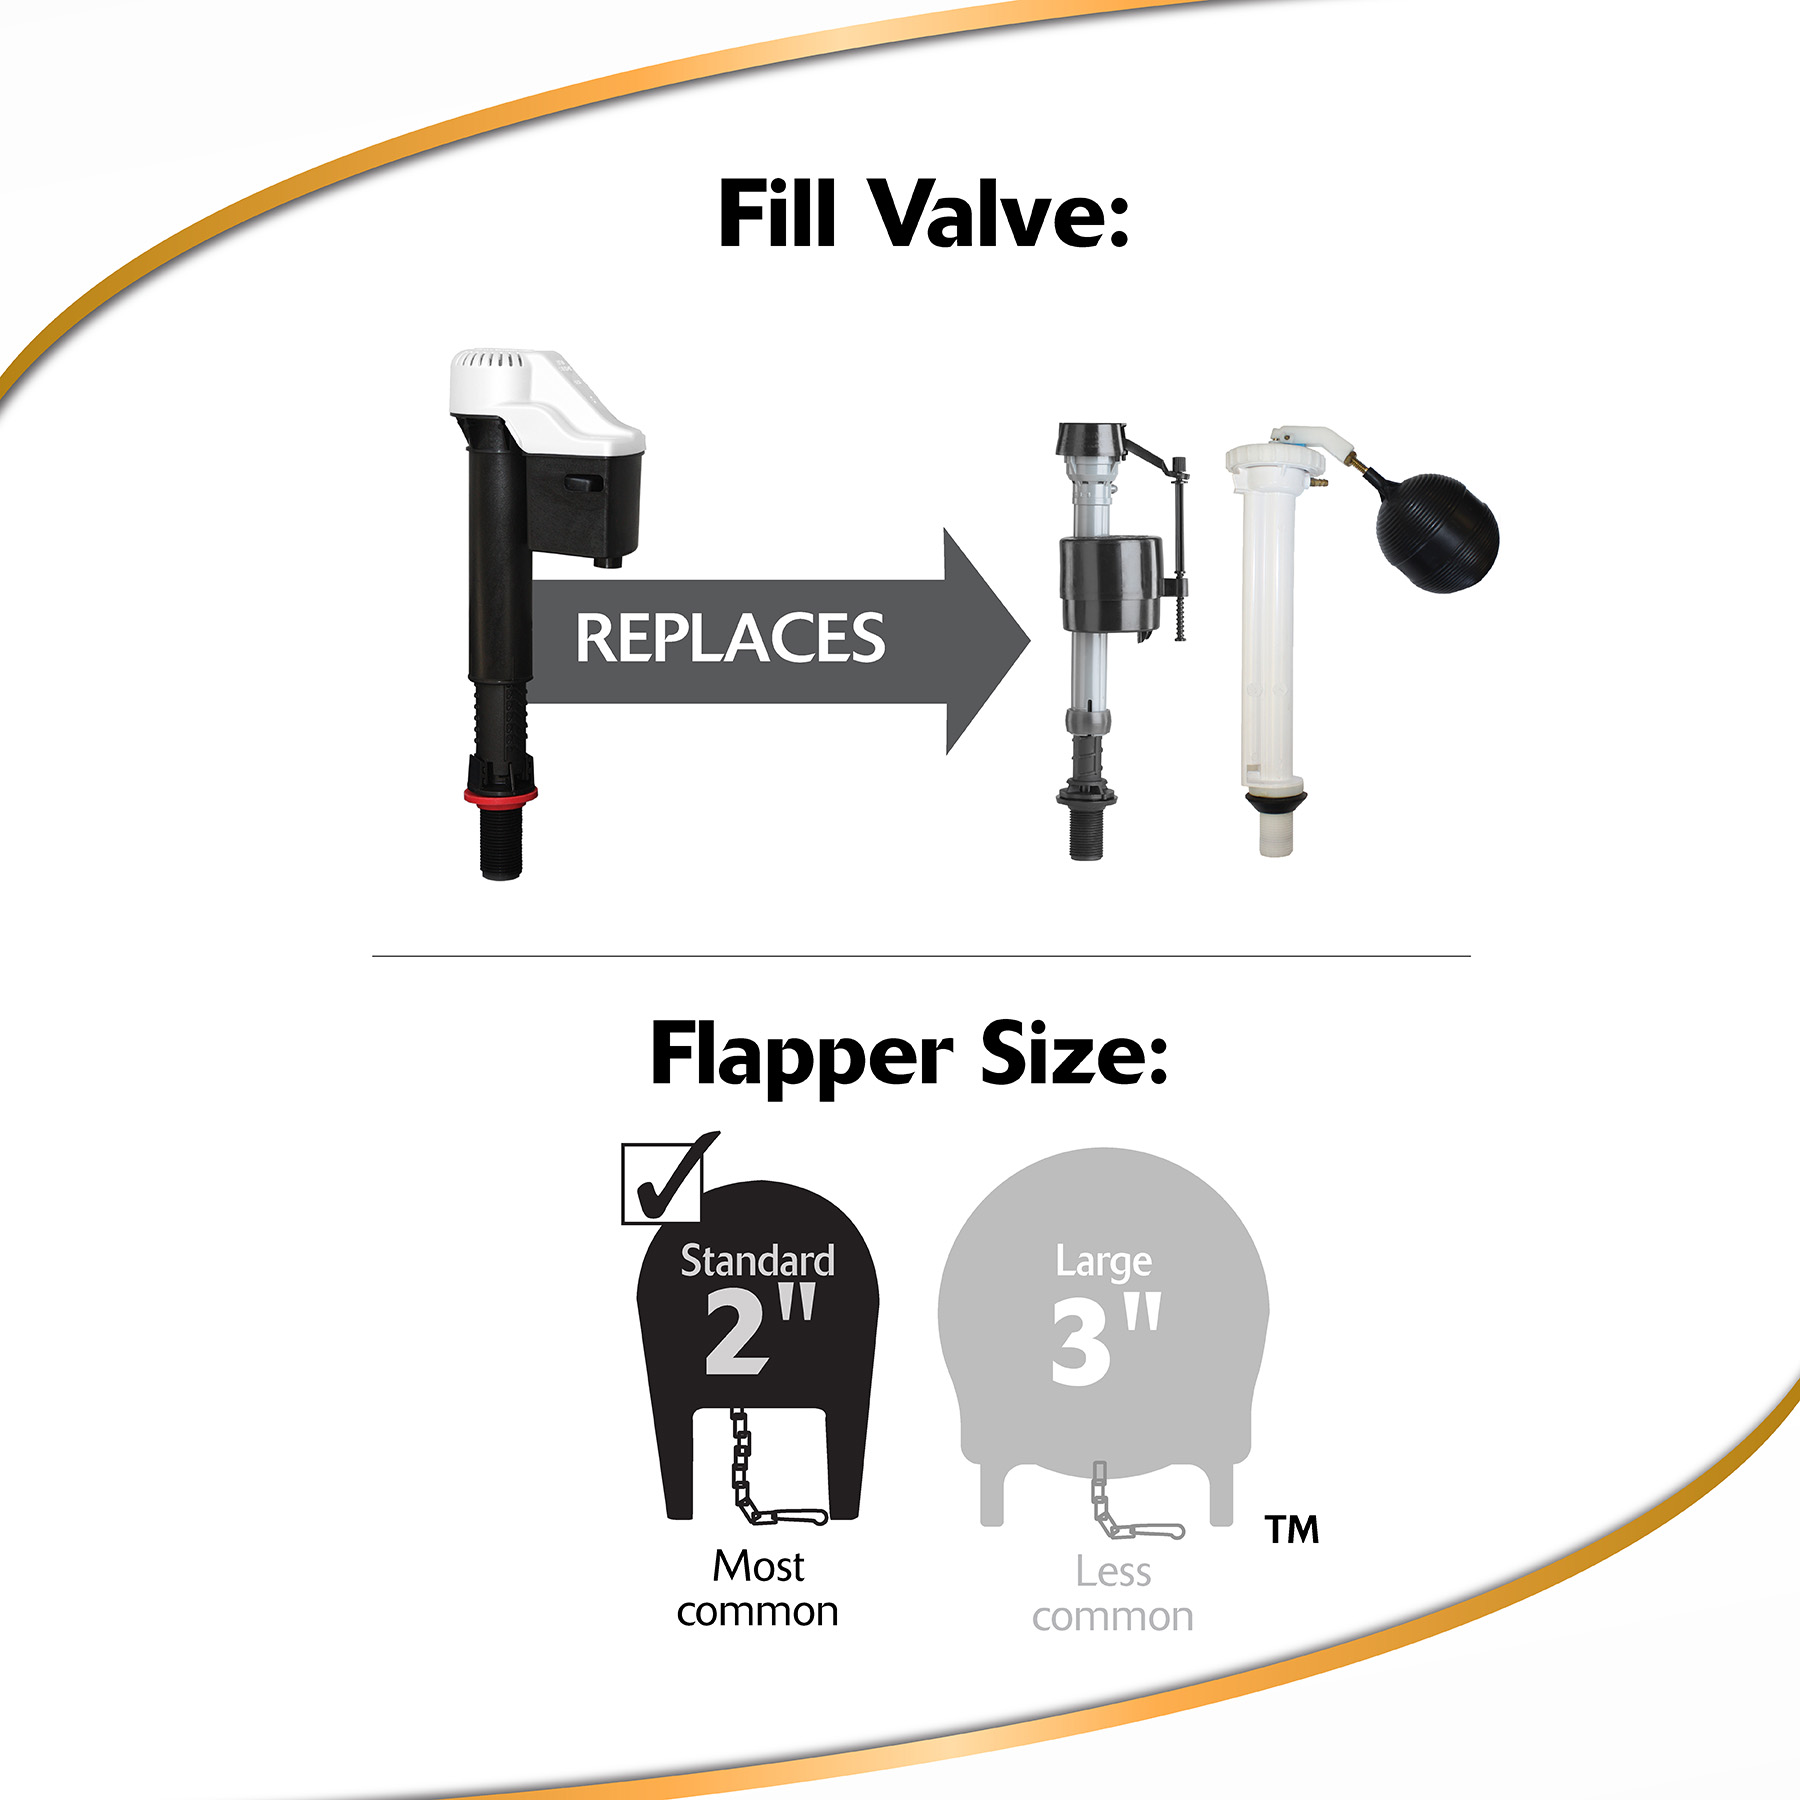 QuietFILL Toilet Fill Valve and 2 Inch Toilet Flapper Kit Replaces Old Technologies